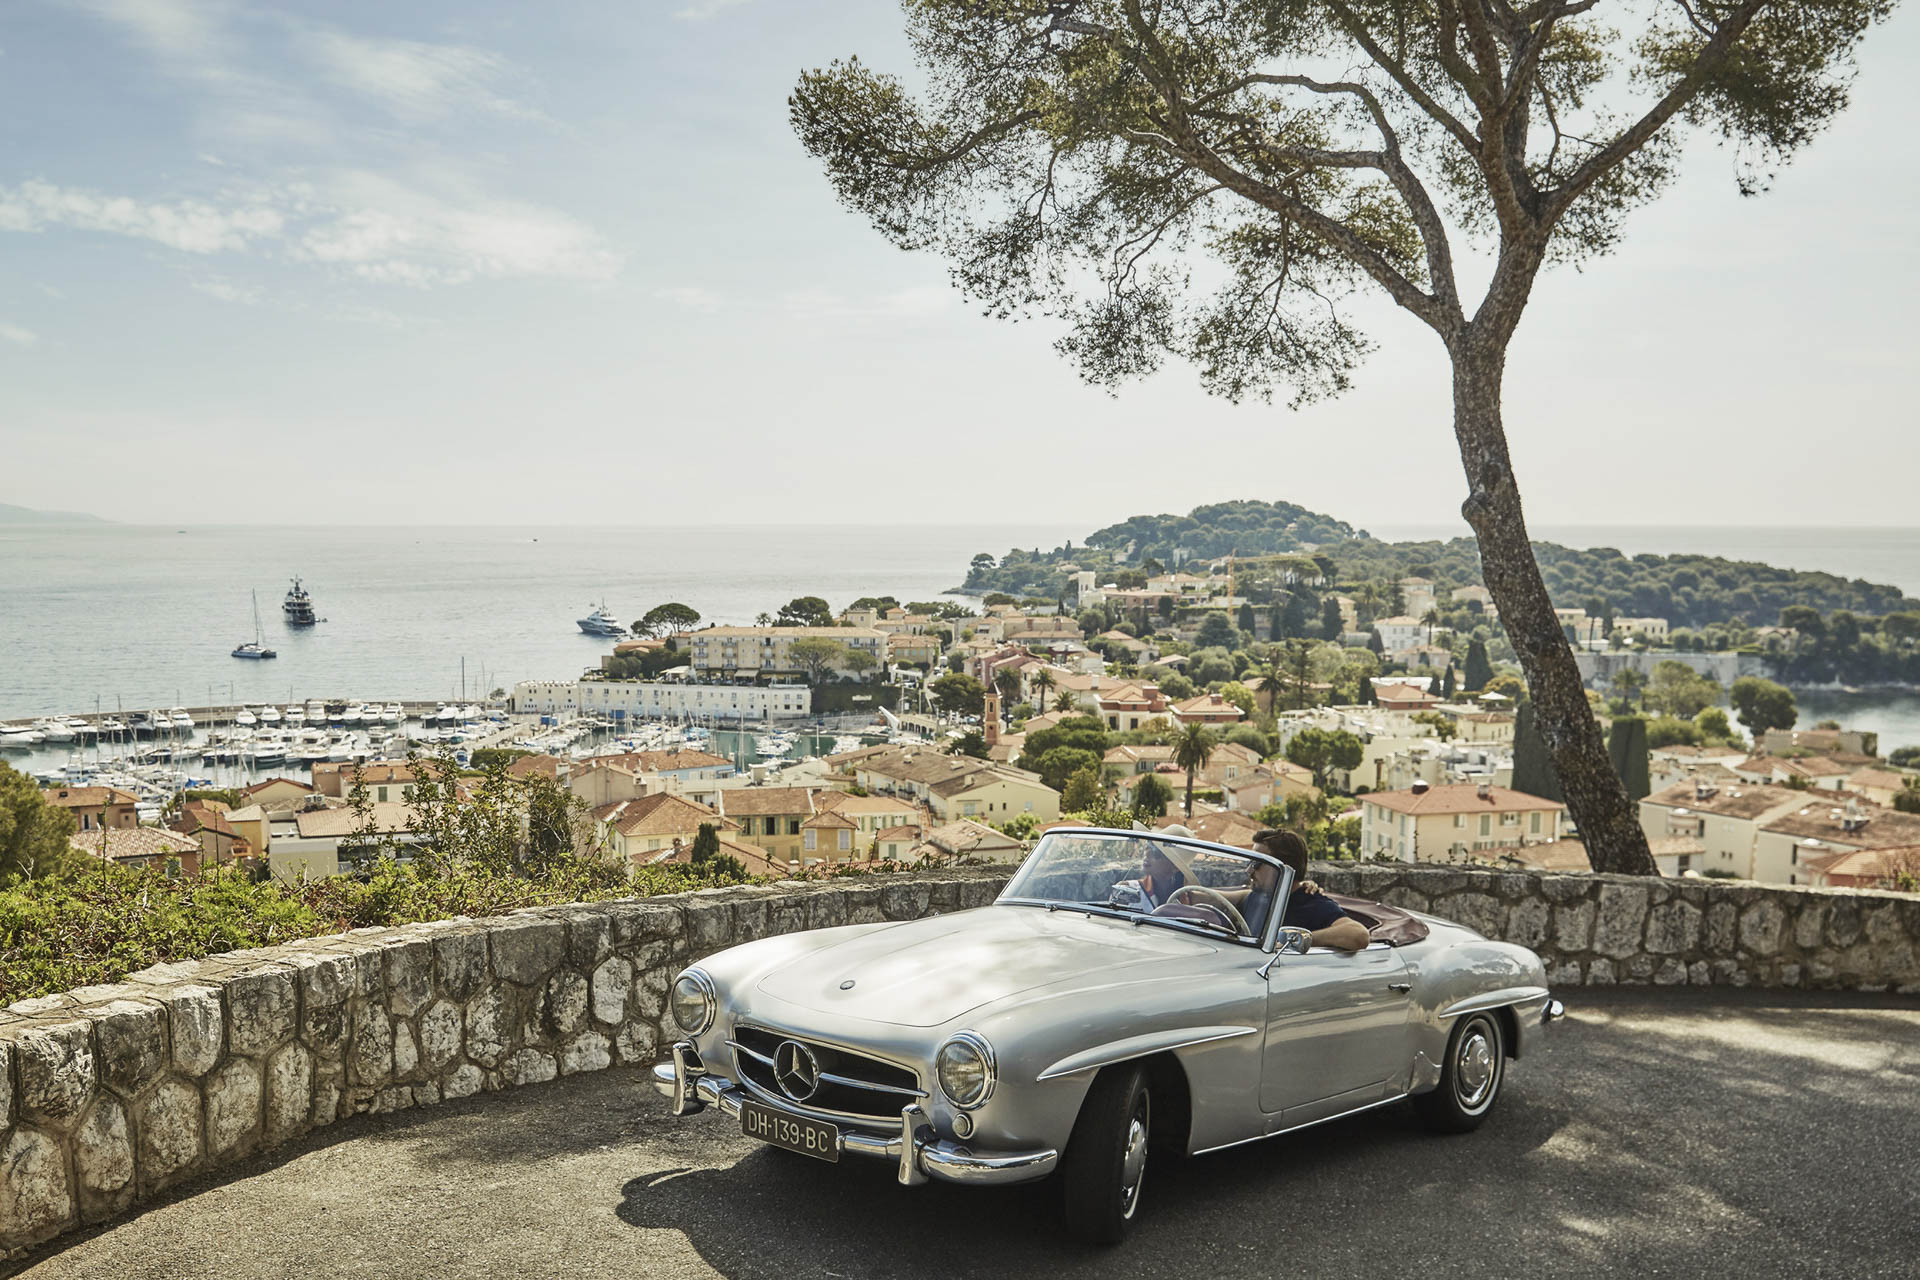 One option: Instead of buying a Mercedes SL 140 Cabriolet, rent one and drive it along the Mediterranean coast.
